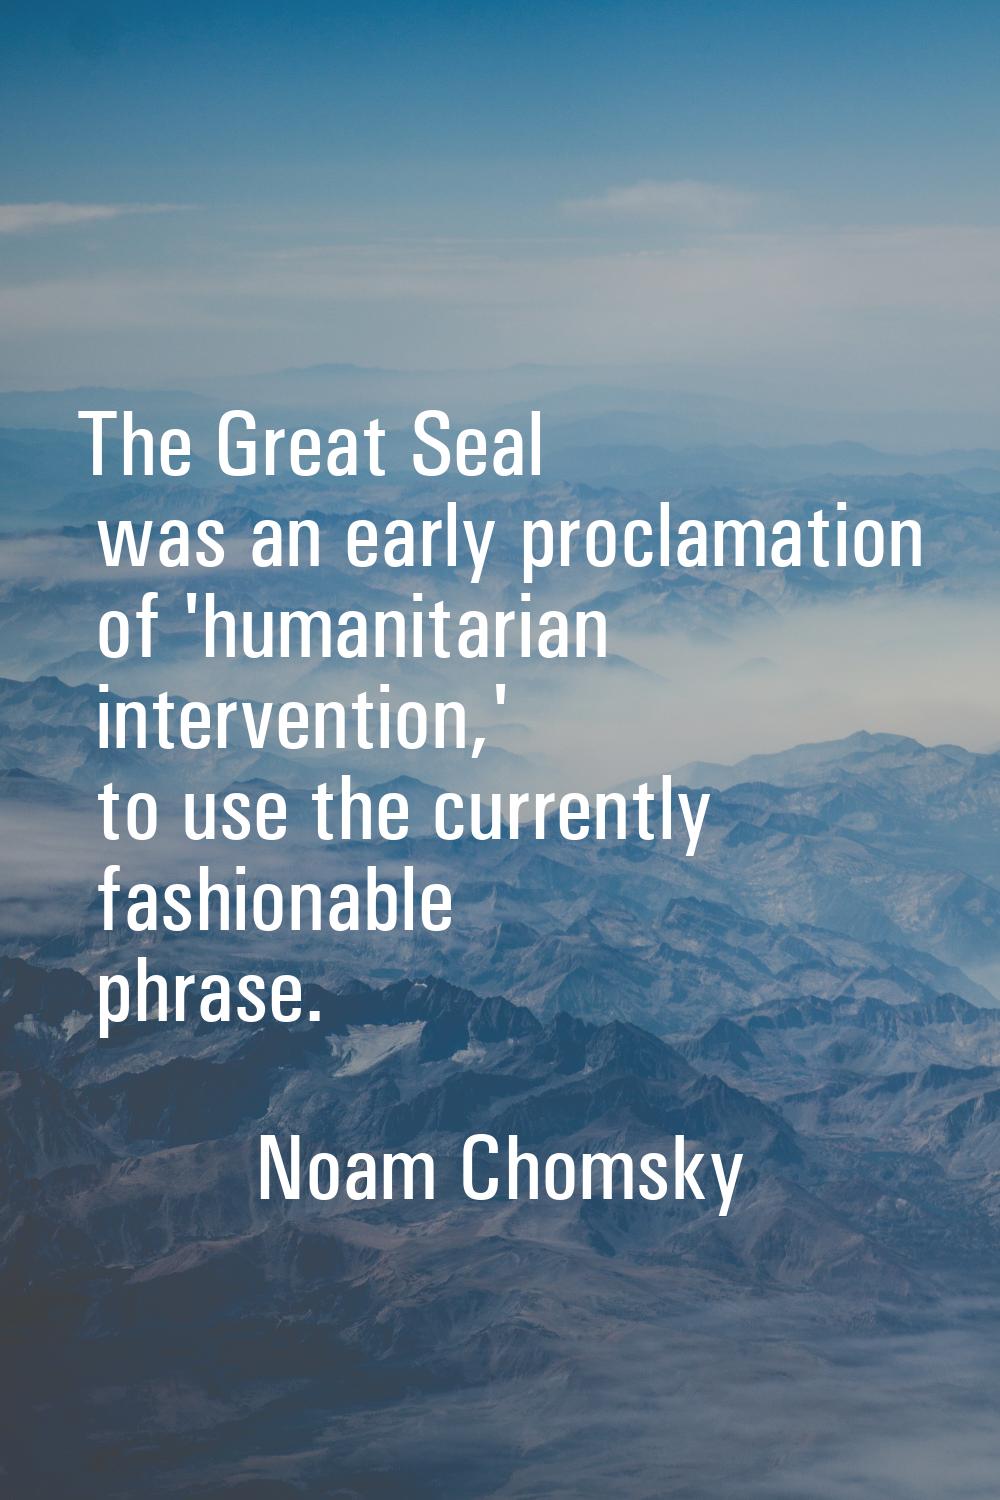 The Great Seal was an early proclamation of 'humanitarian intervention,' to use the currently fashi